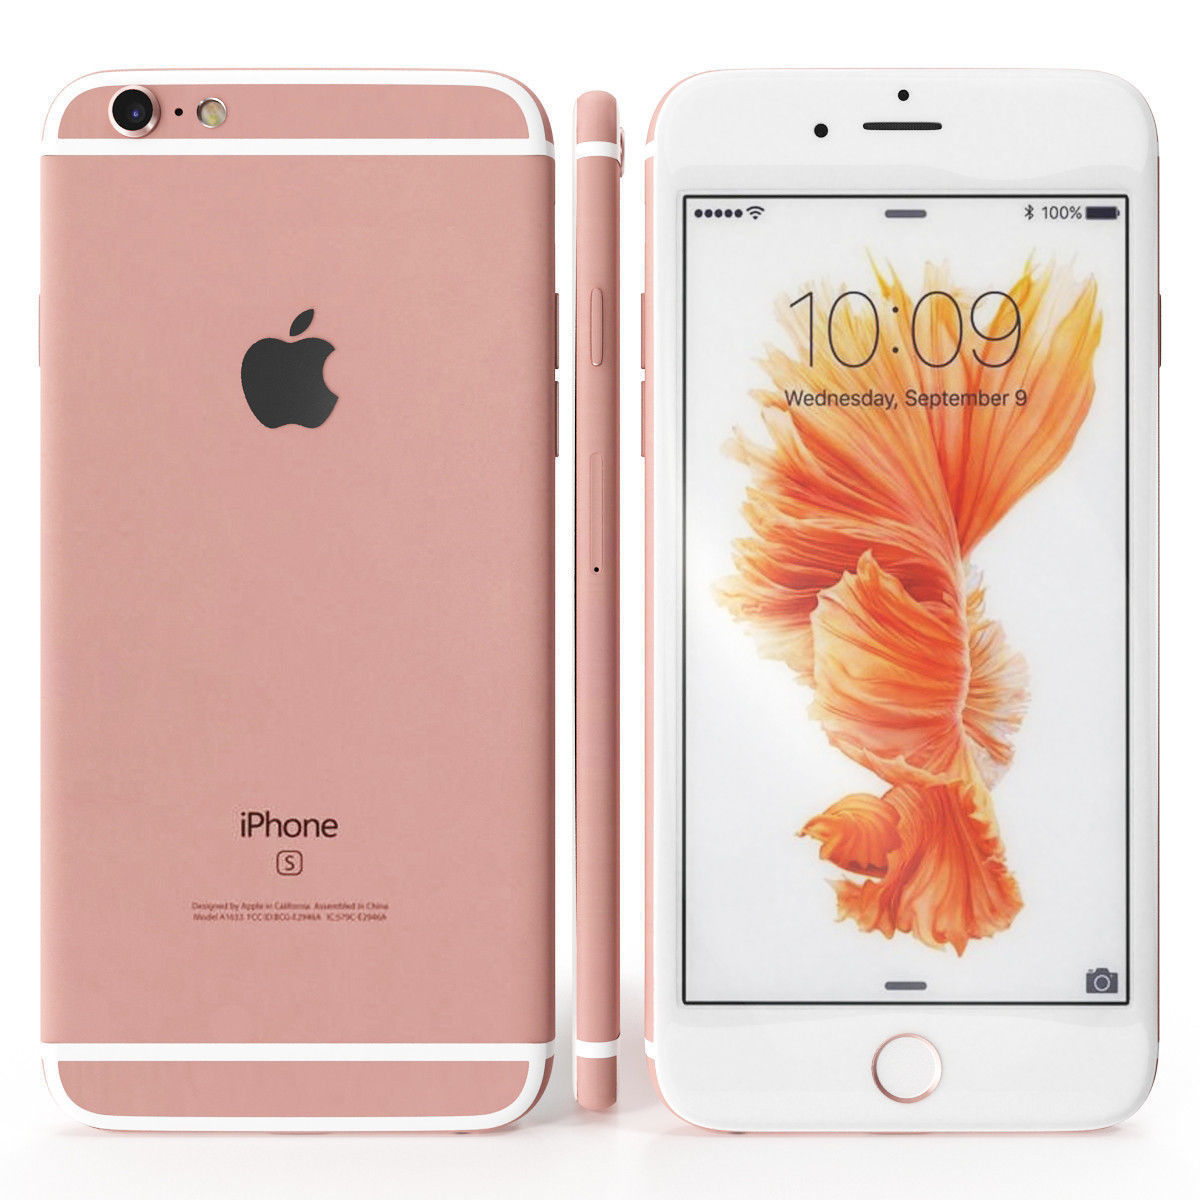 iPhone 6s 16GB Rose Gold – Unlocked – Refurbished Grade A (Very Good